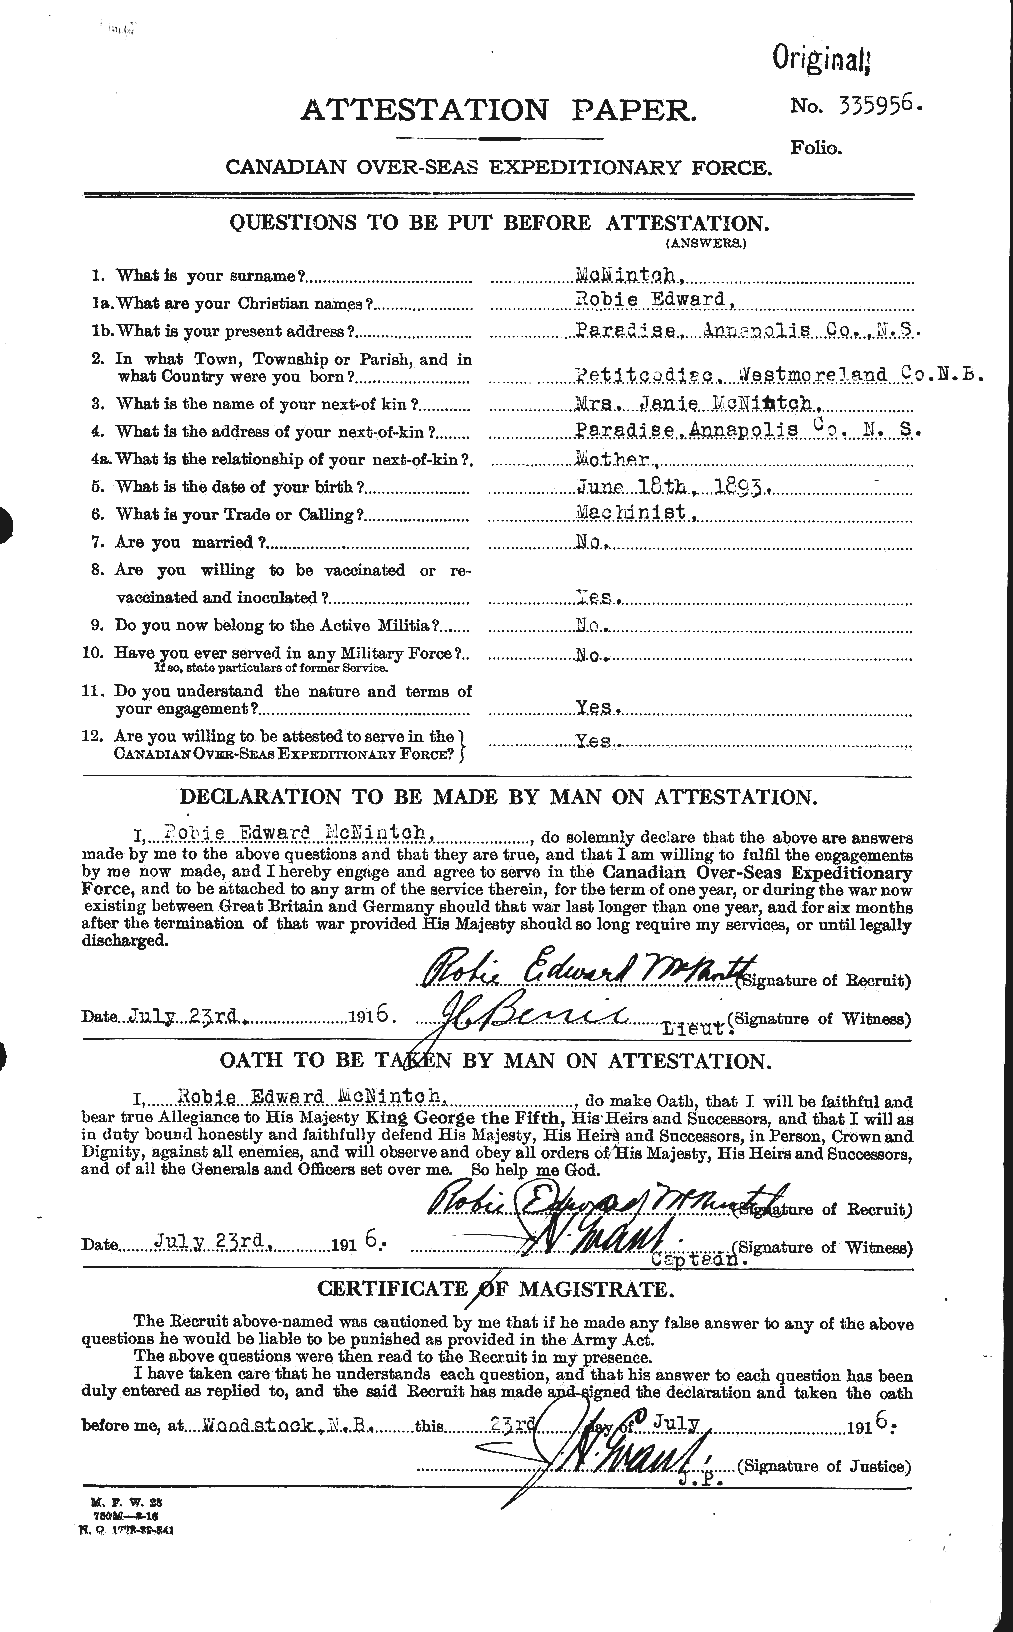 Personnel Records of the First World War - CEF 539269a